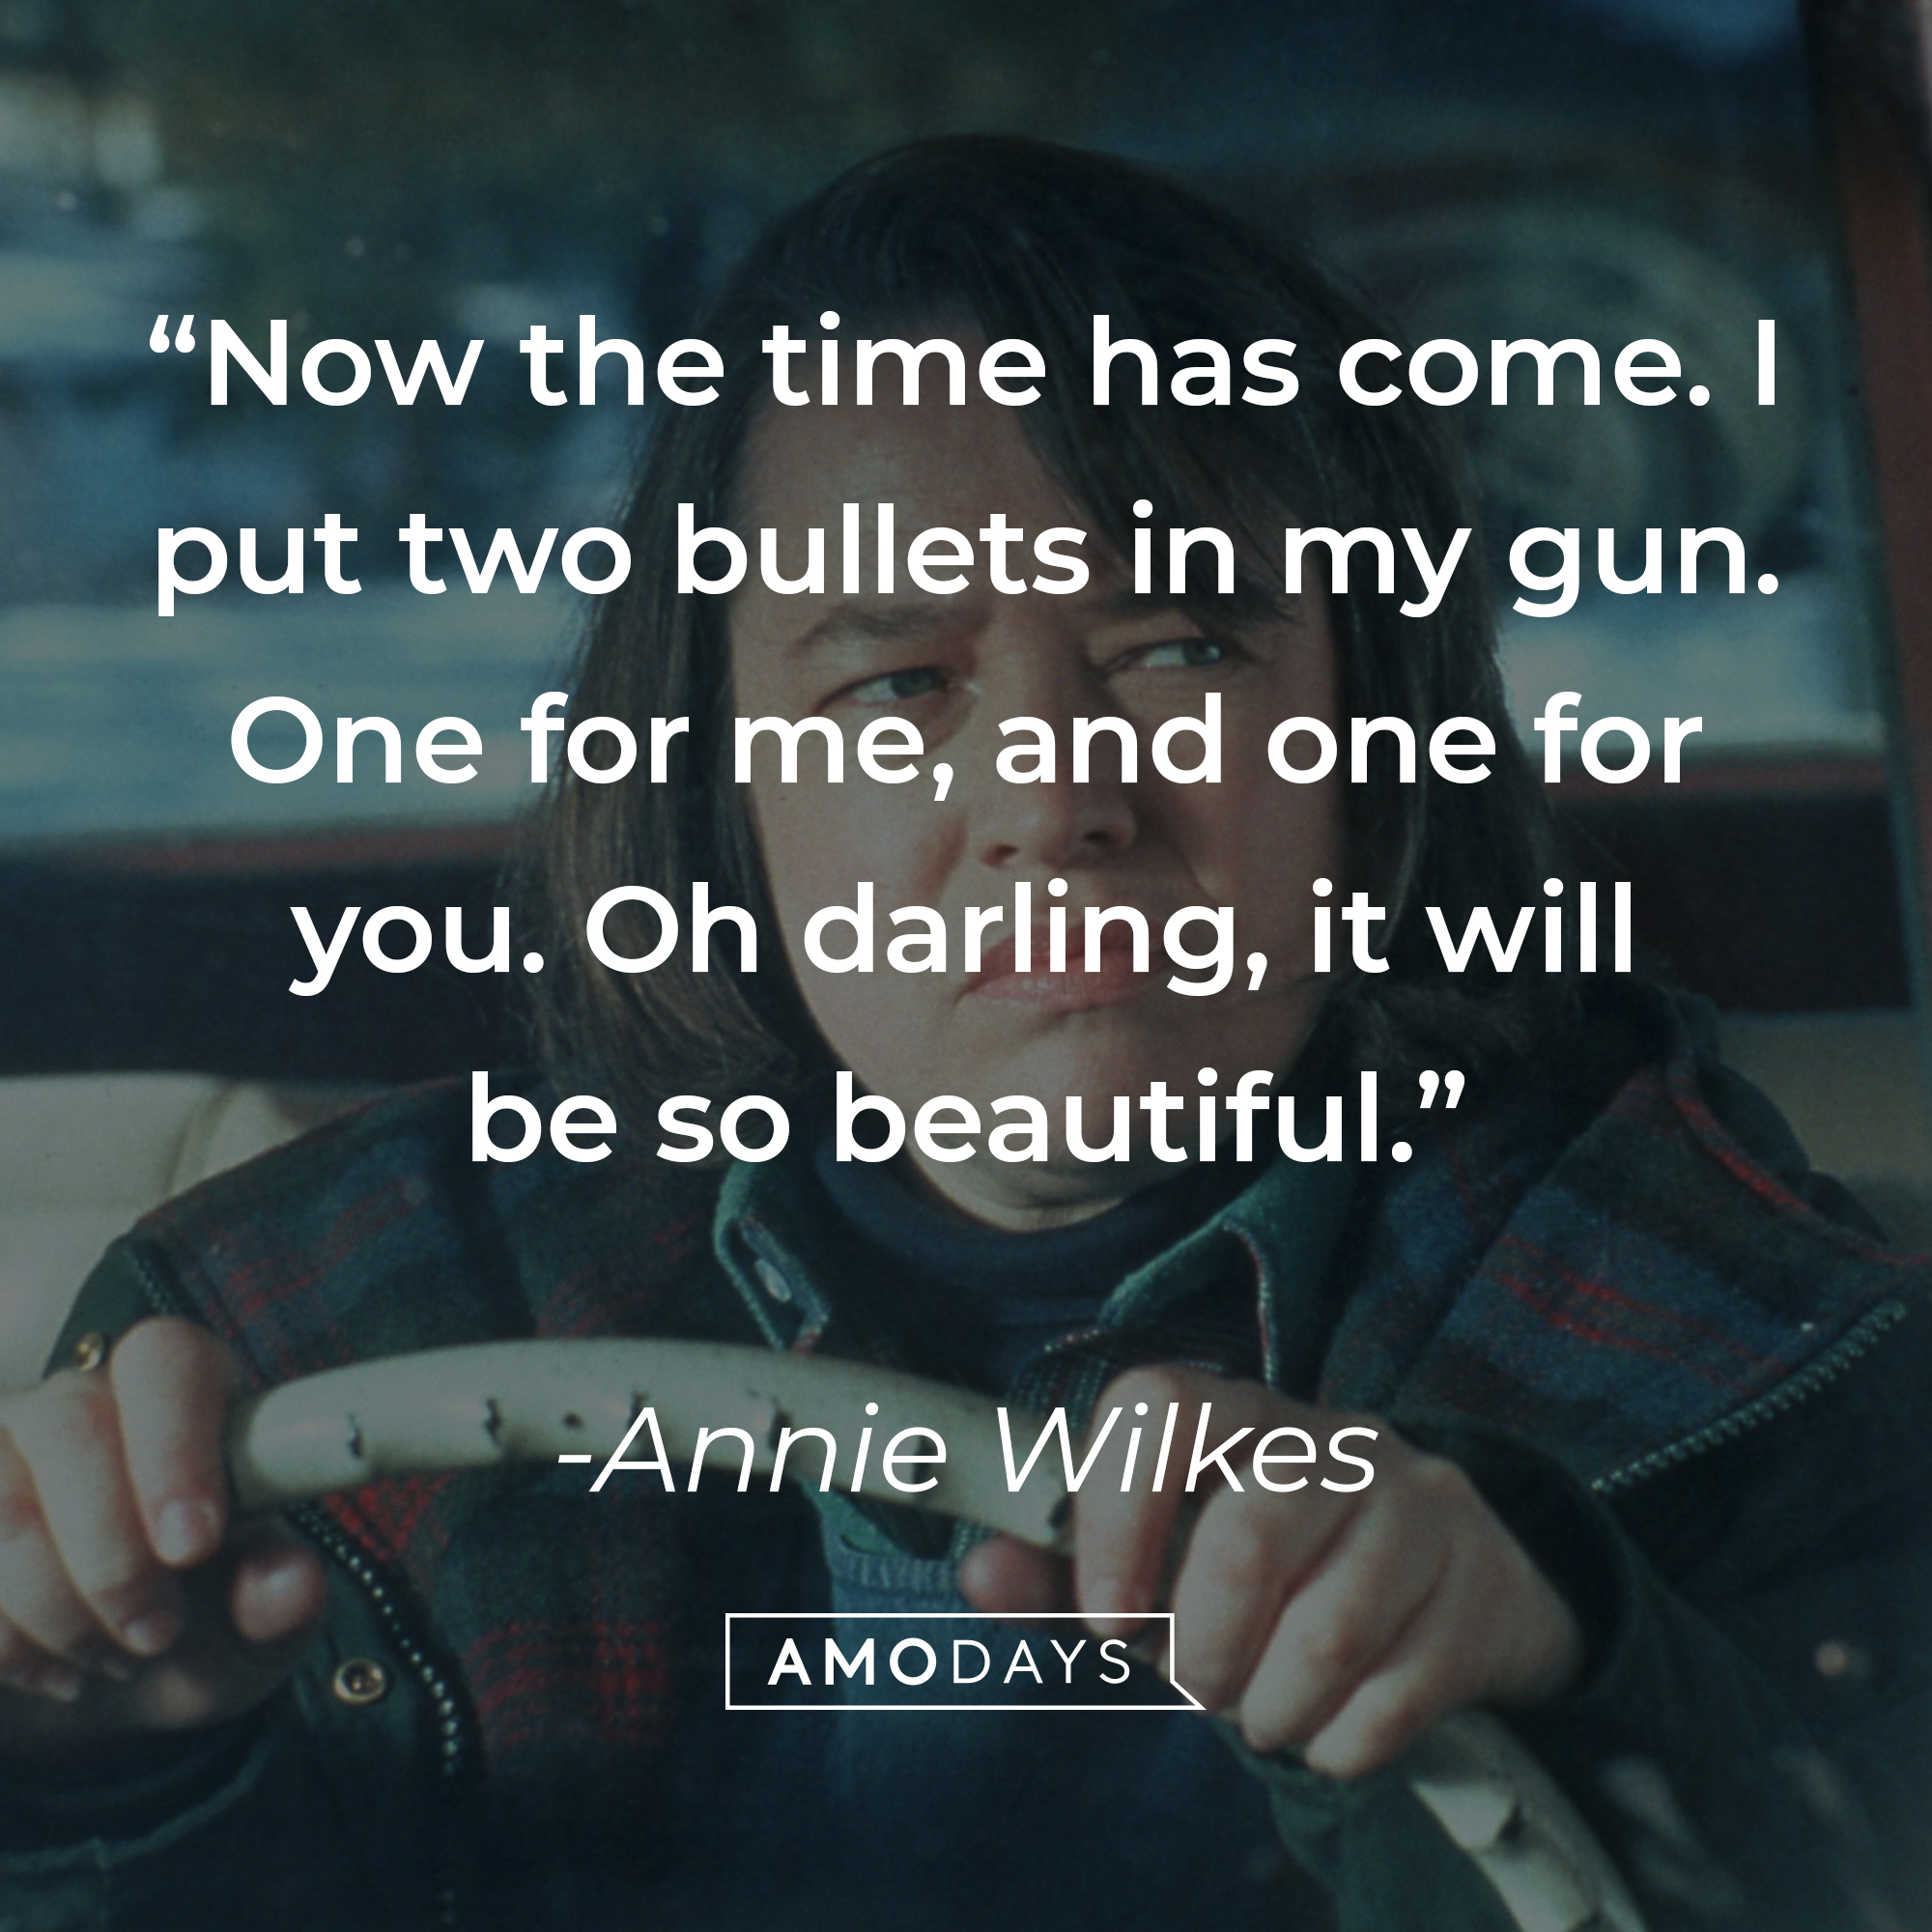 Annie Wilkes' quote: “Now the time has come. I put two bullets in my gun. One for me, and one for you. Oh darling, it will be so beautiful.” | Source: facebook.com/MiseryMovie